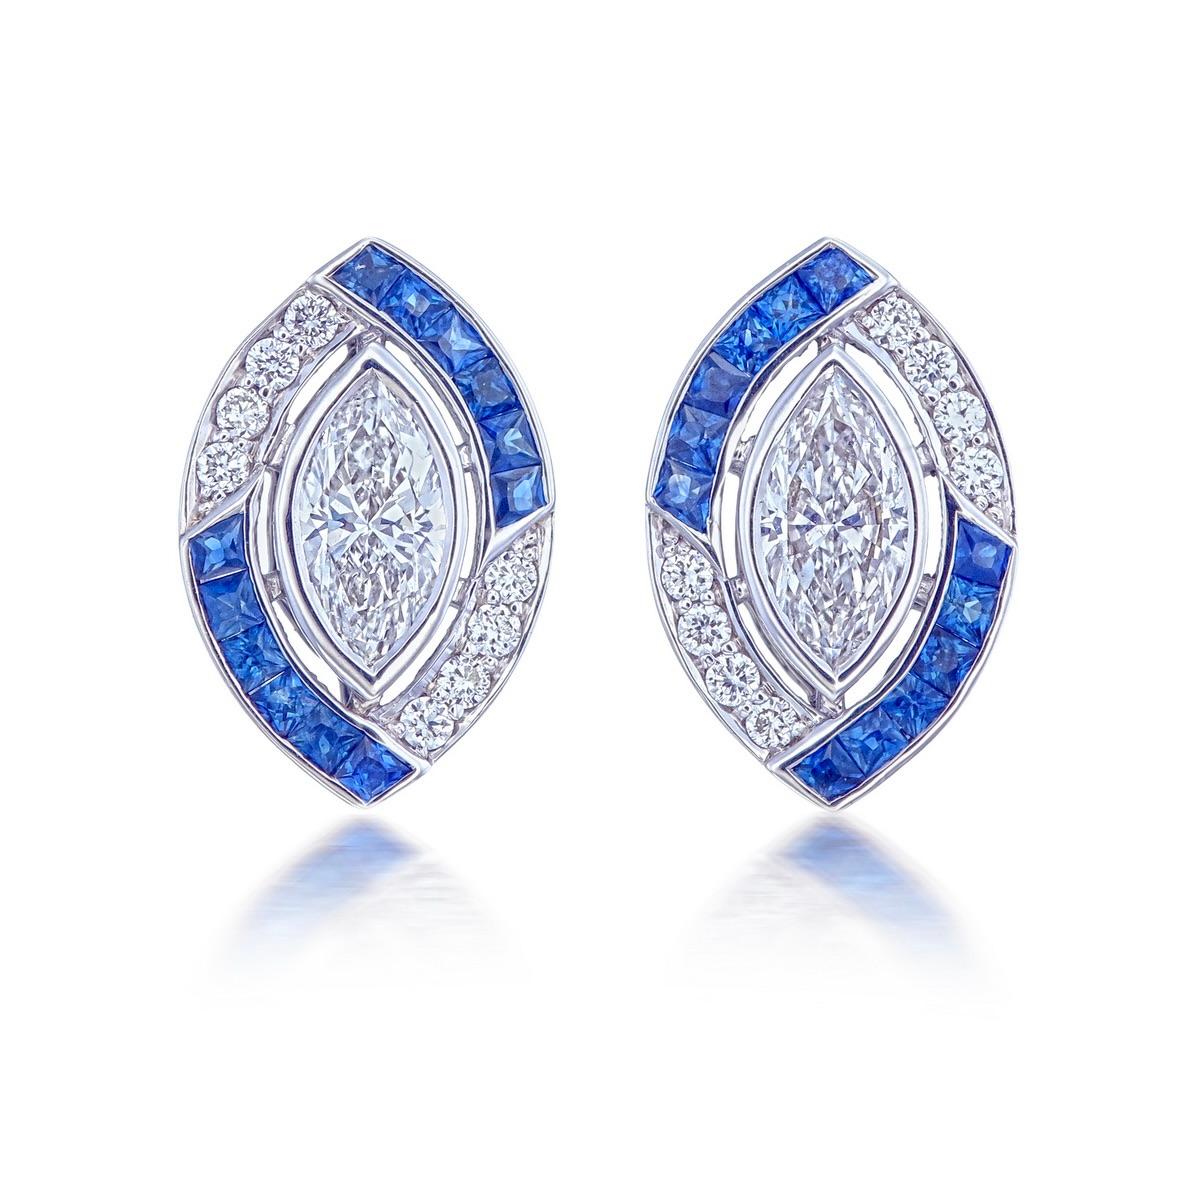 1.31 Carat Diamond and Blue Sapphire Earrings in 18k White Gold In New Condition For Sale In Bangkok, TH